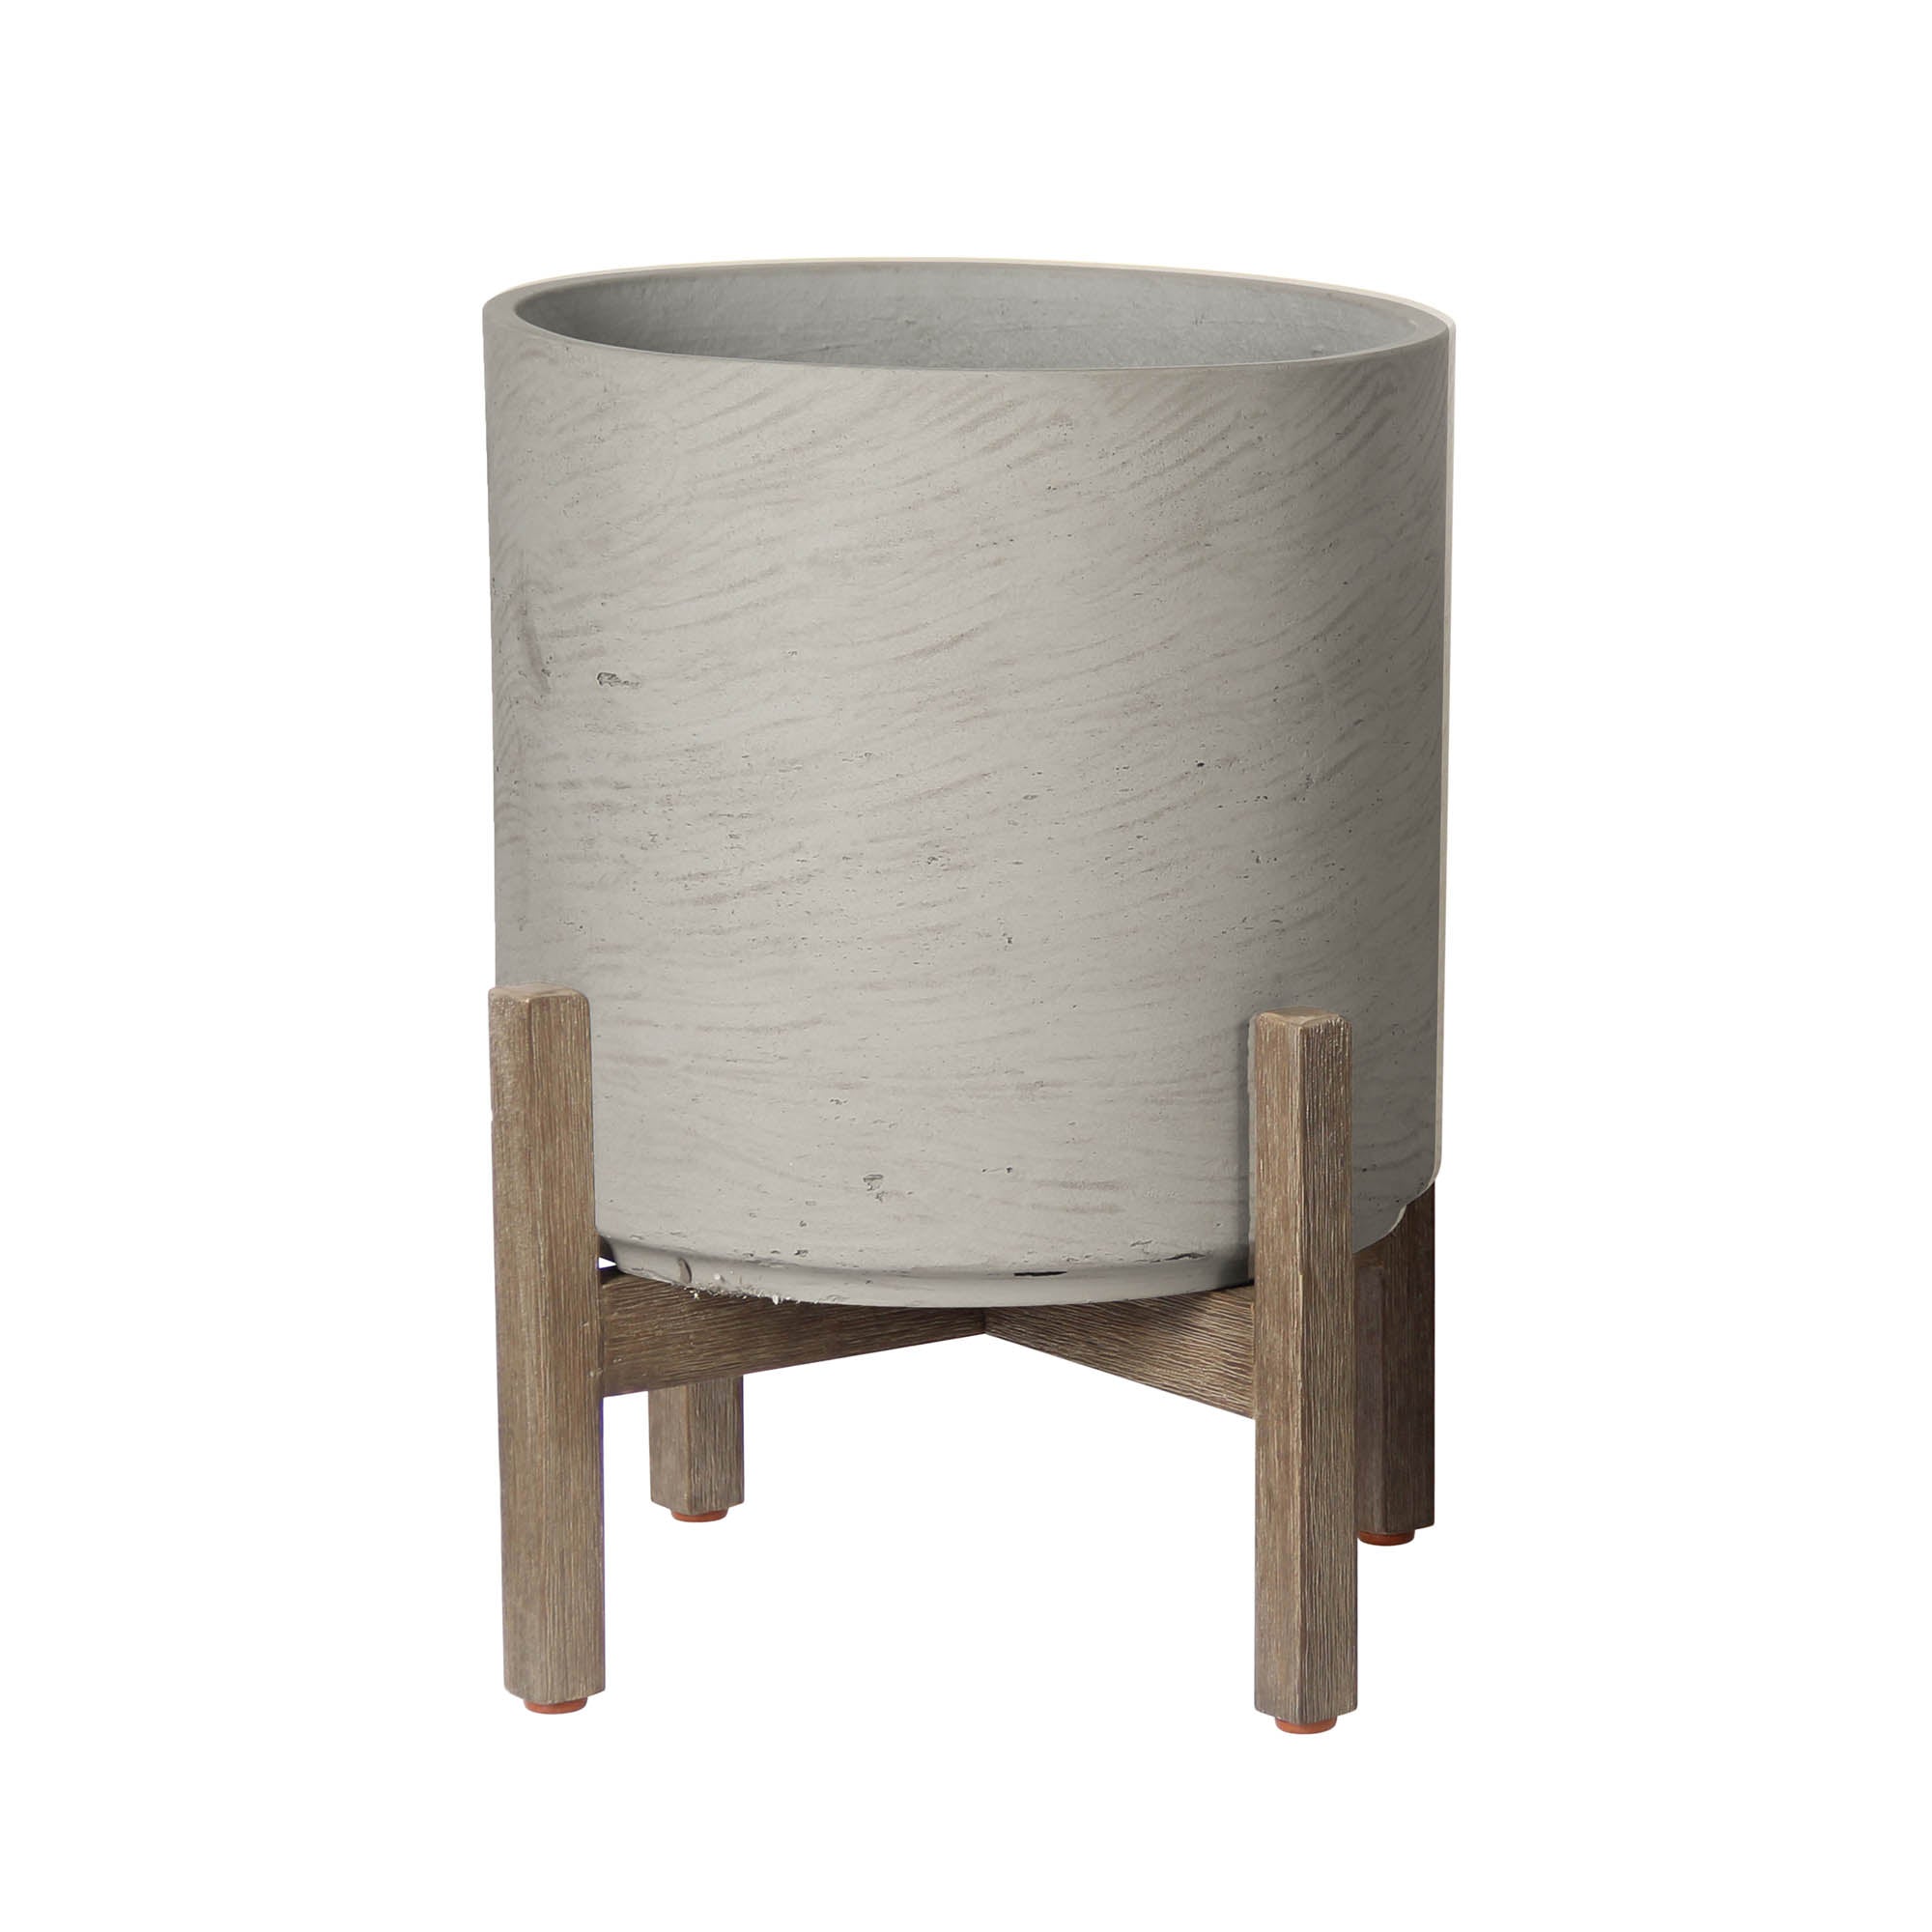 LH Imports, Pat Round Standing Pot - Cement Grey